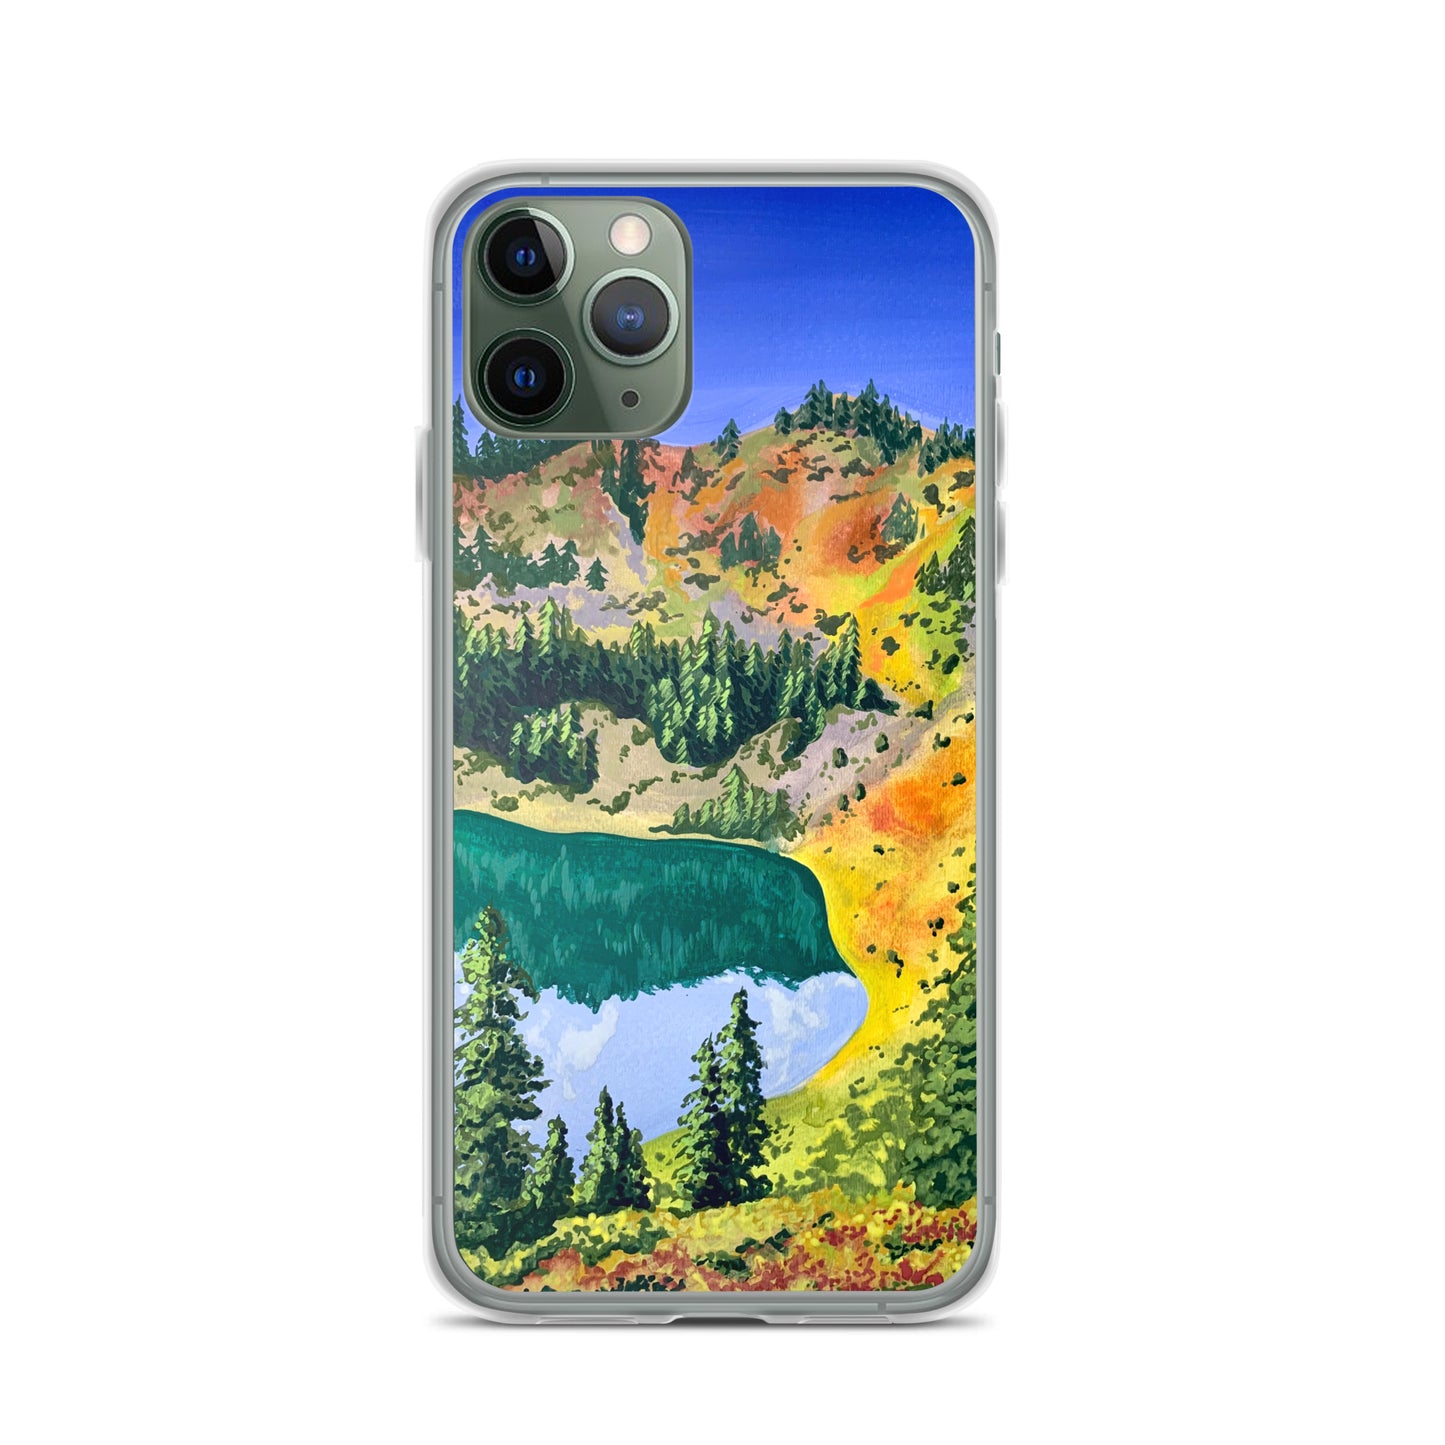 Olympic National Park iPhone Case